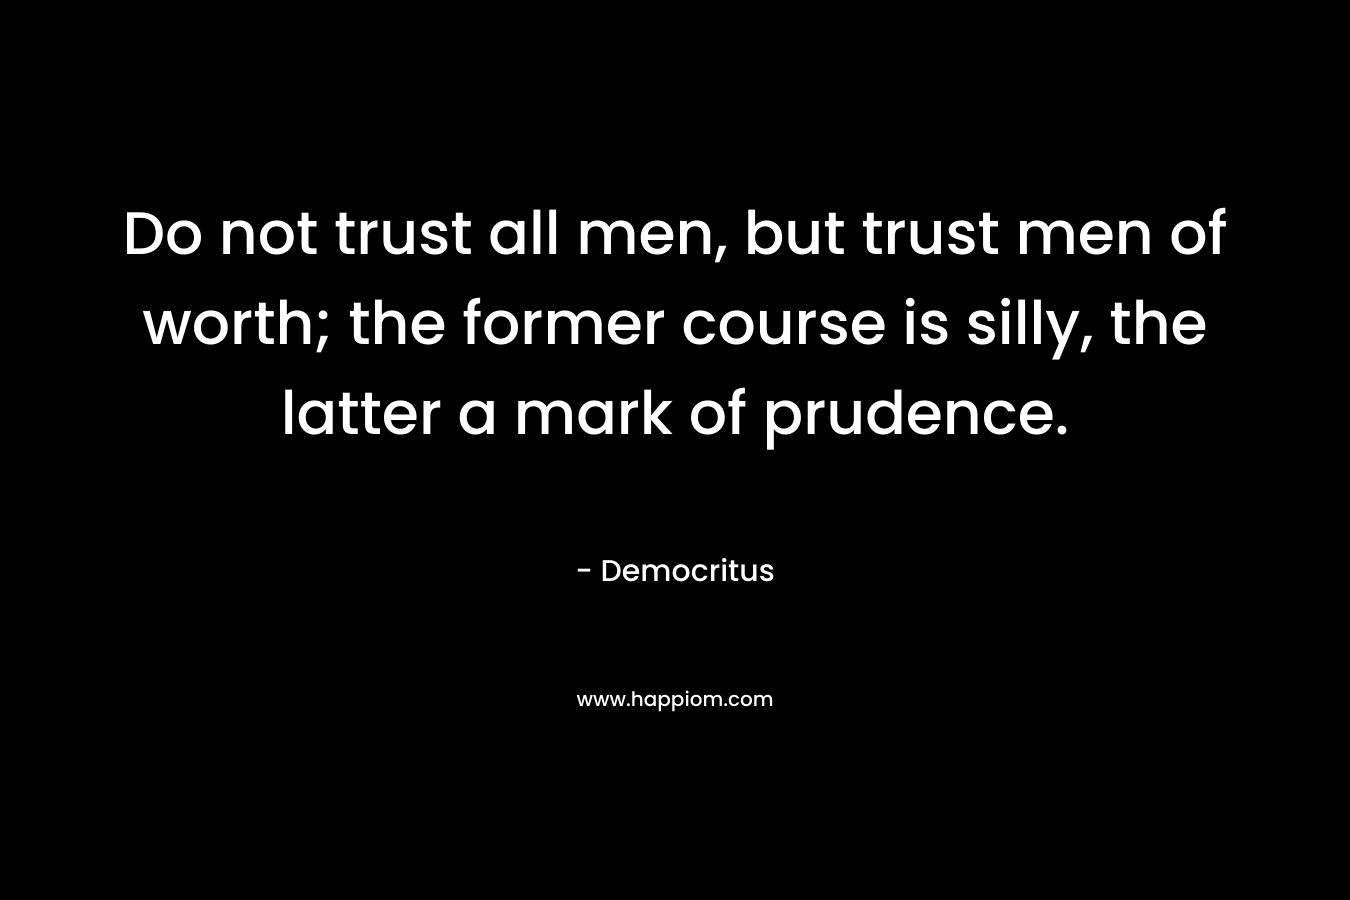 Do not trust all men, but trust men of worth; the former course is silly, the latter a mark of prudence.